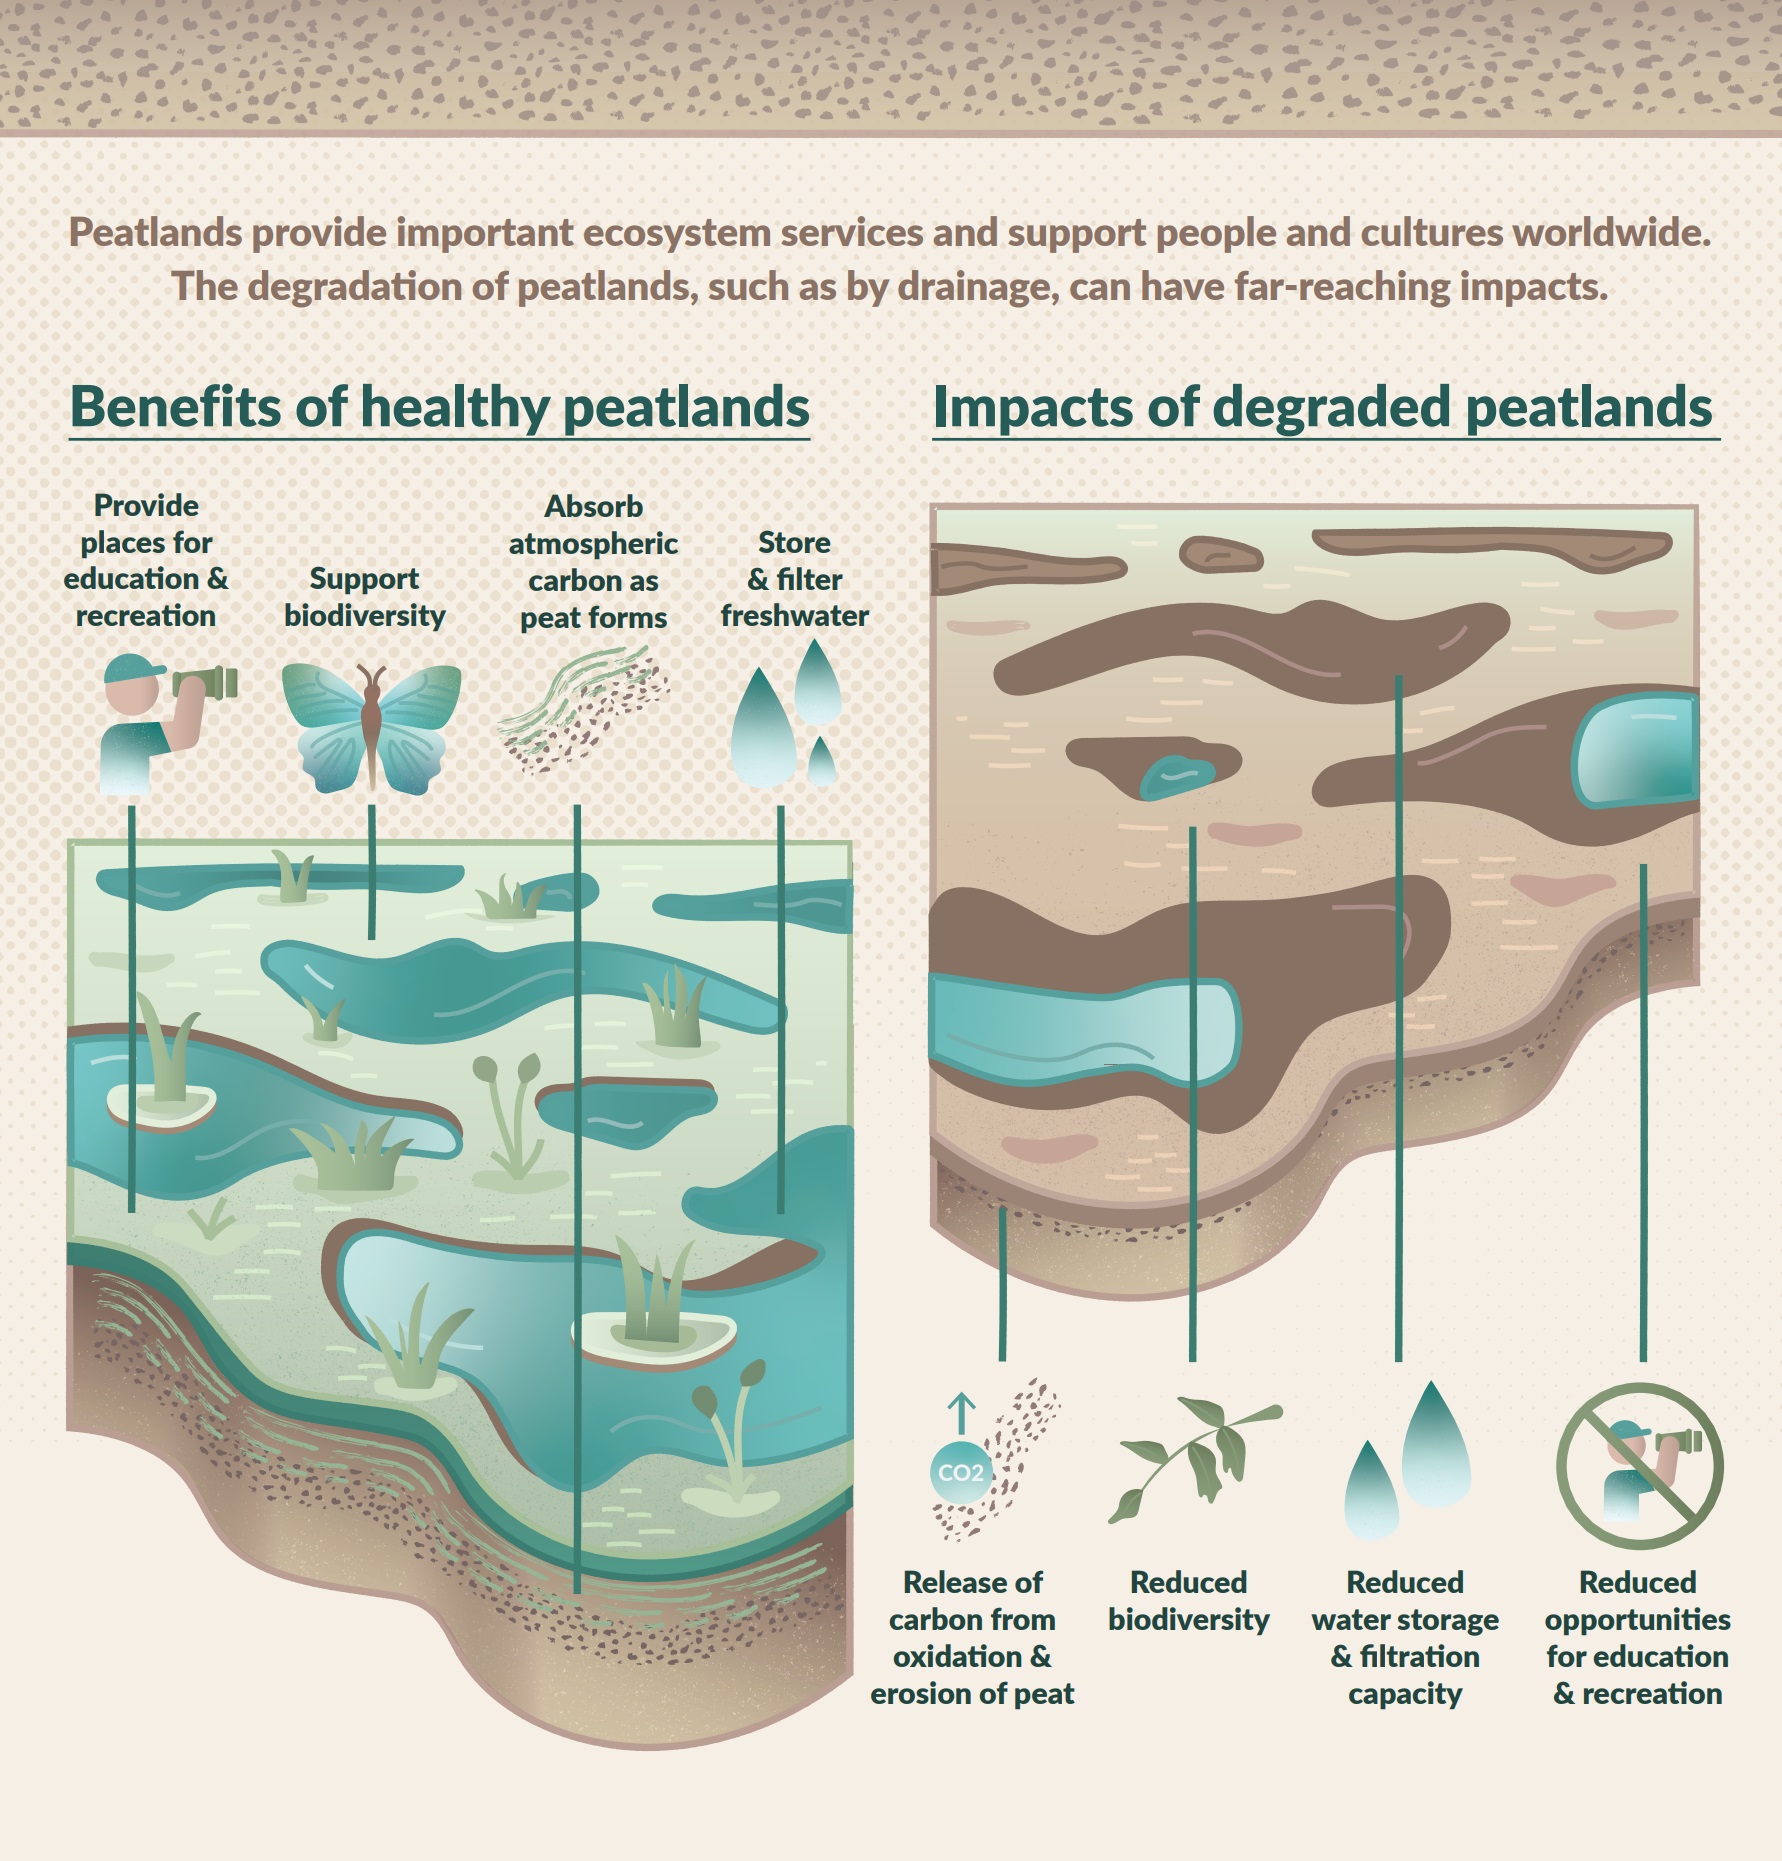 Peatlands provide important ecosystem services and support people and cultures worldwide. The degradation of peatlands, such as by drainage, can have far-reaching impacts.